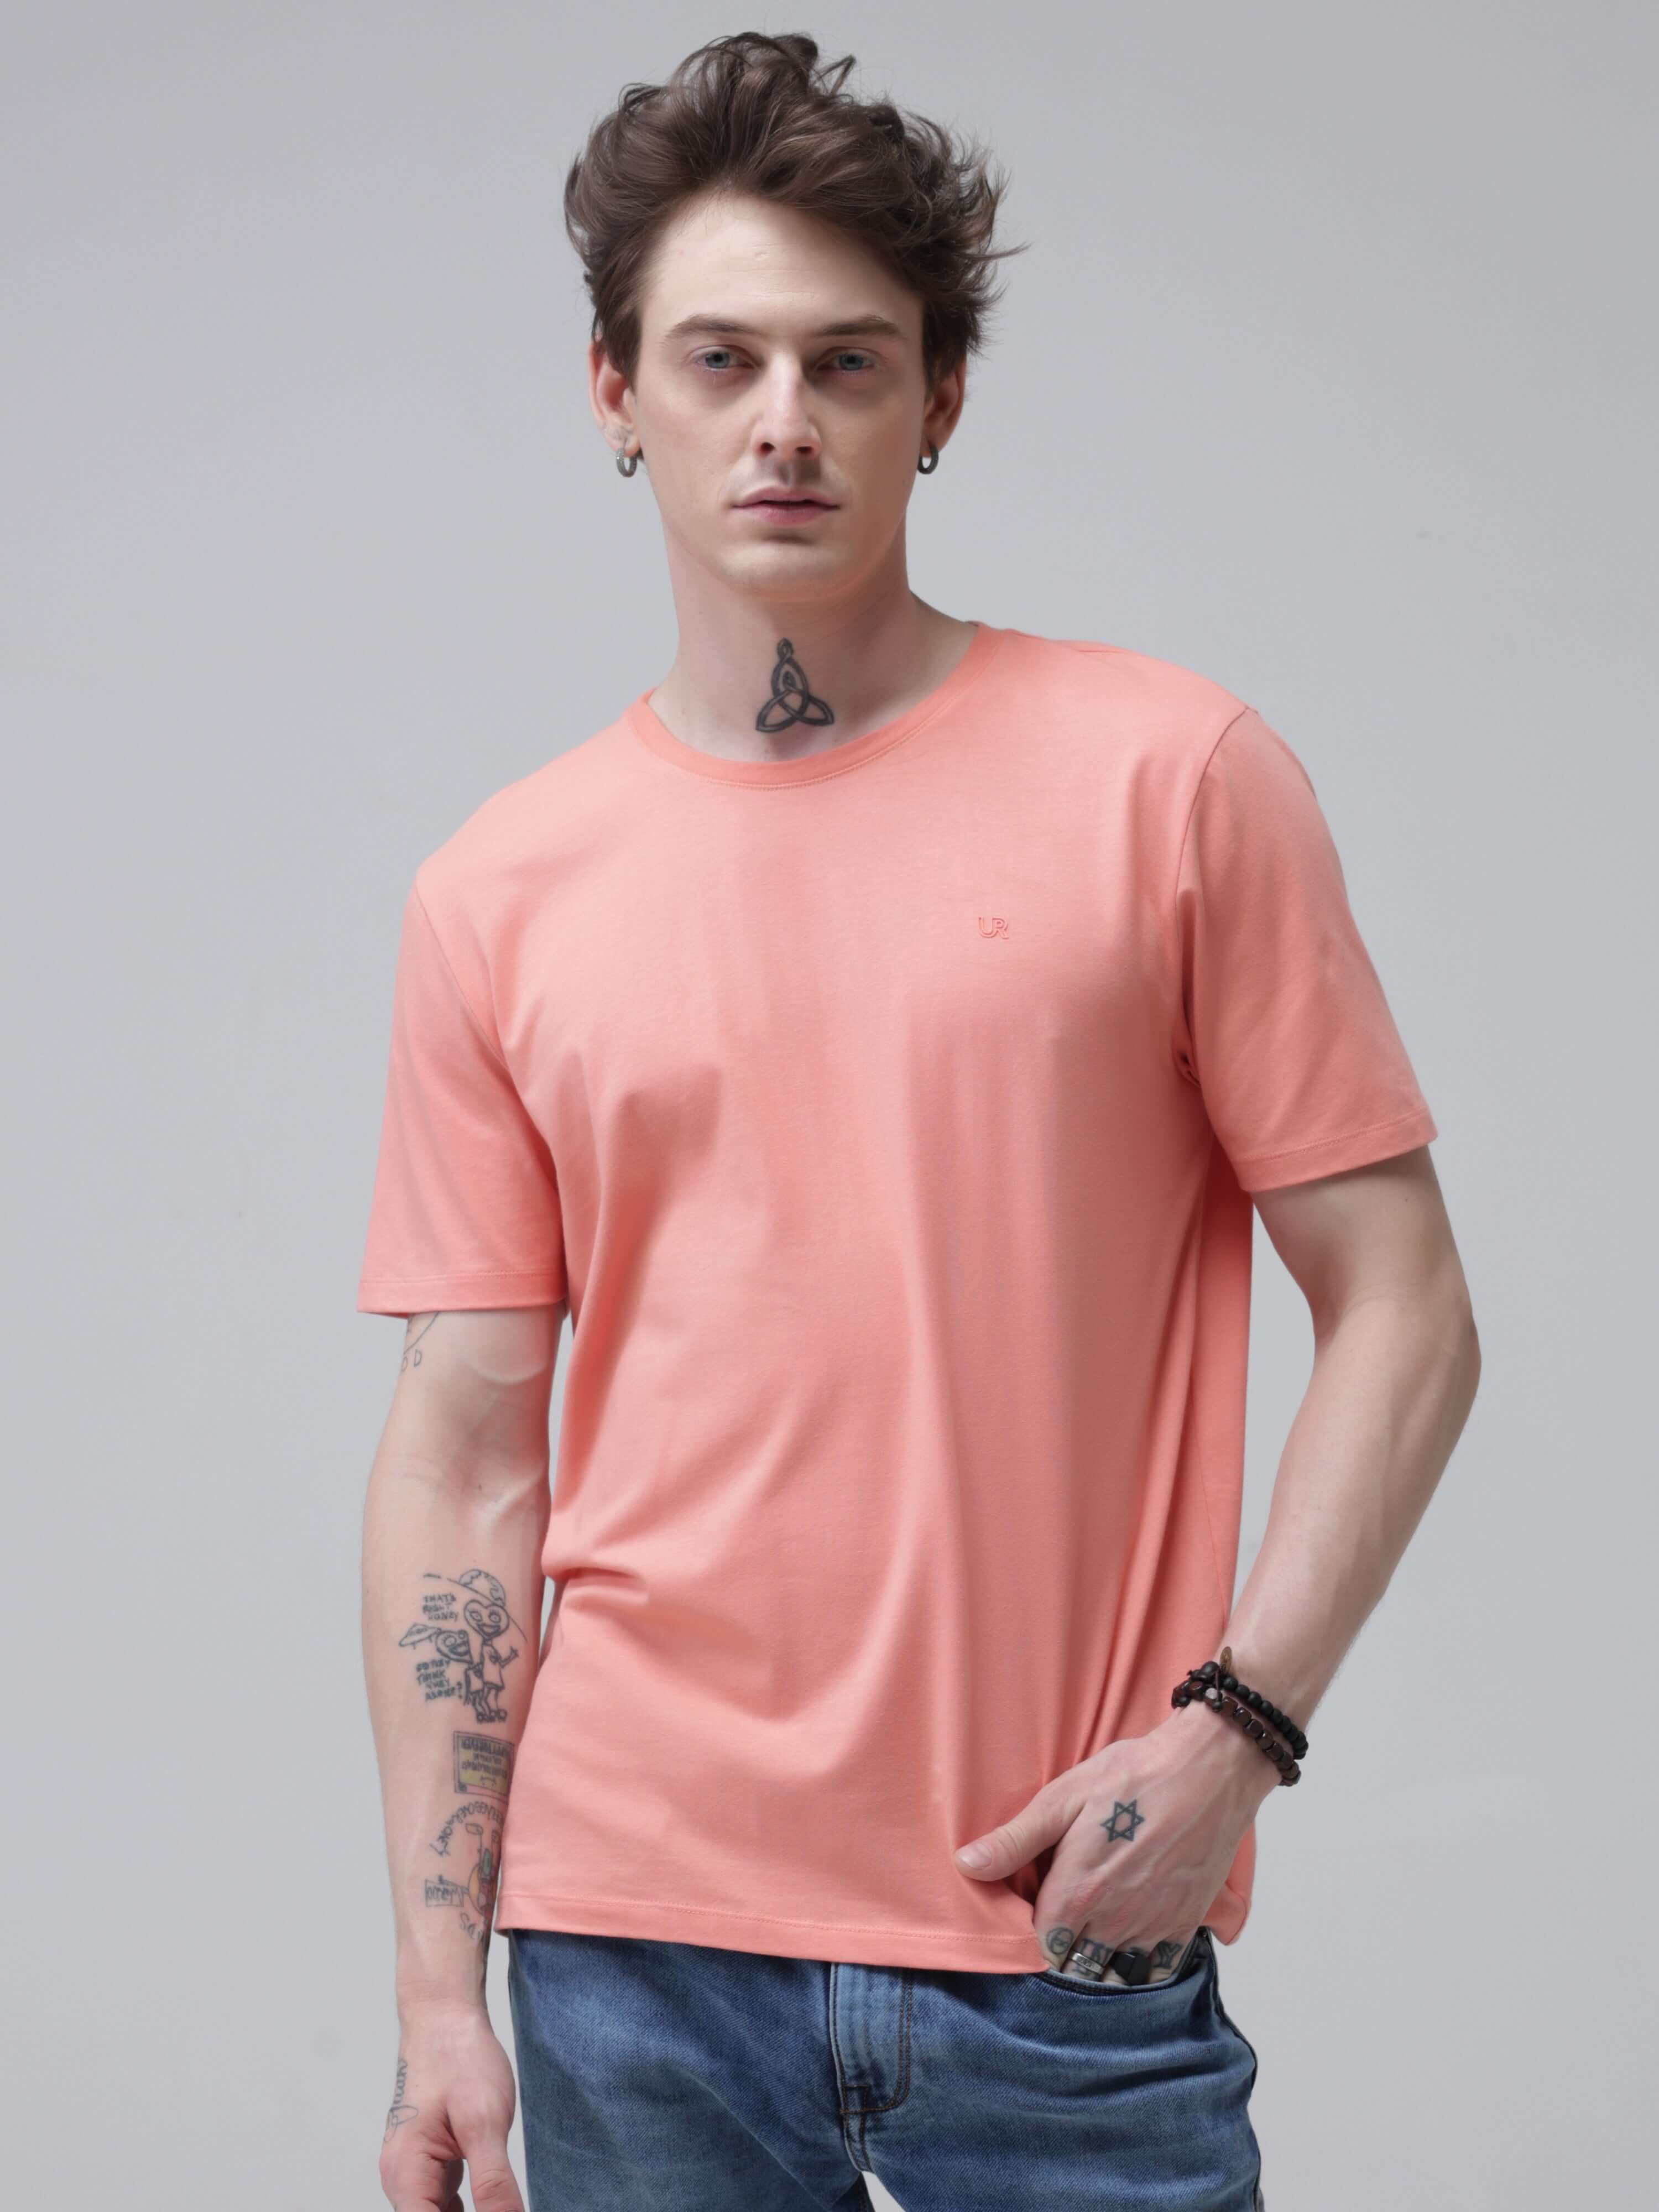 Man wearing a Sunset Spice Turms T-shirt, showcasing anti-stain, anti-odor, stretchable intelligent apparel. Trending tailored fit crew neck.